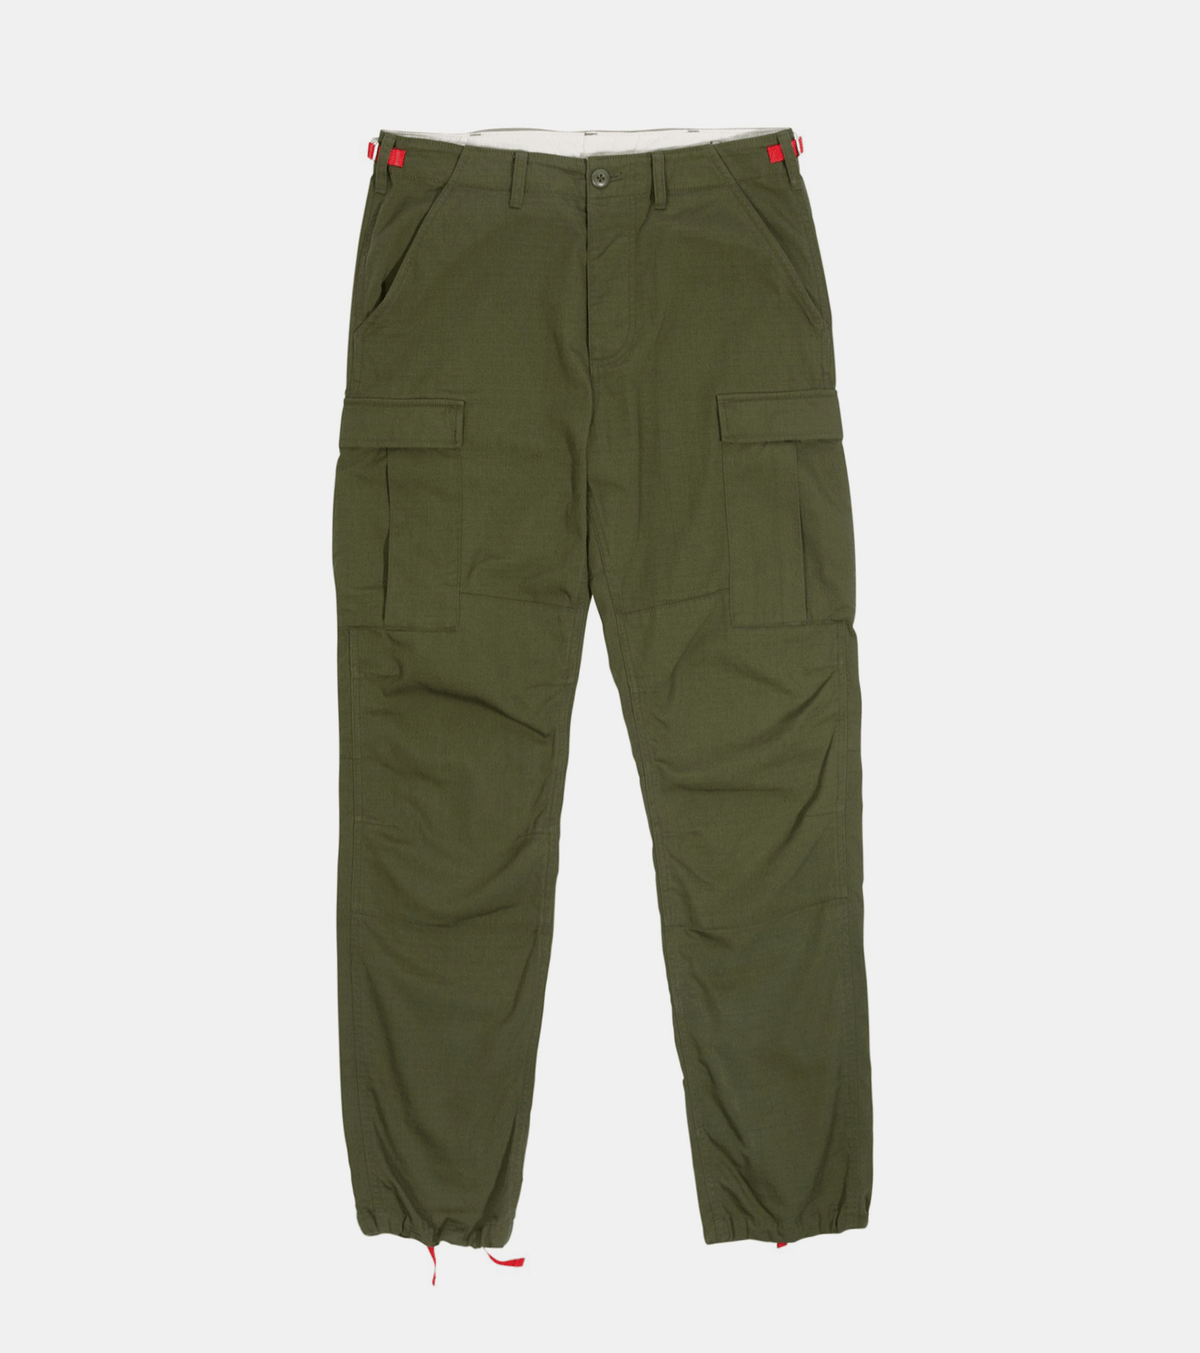 Topo Designs Military Cargo Pants Large 32-34 / Olive | AT EASE SHOP